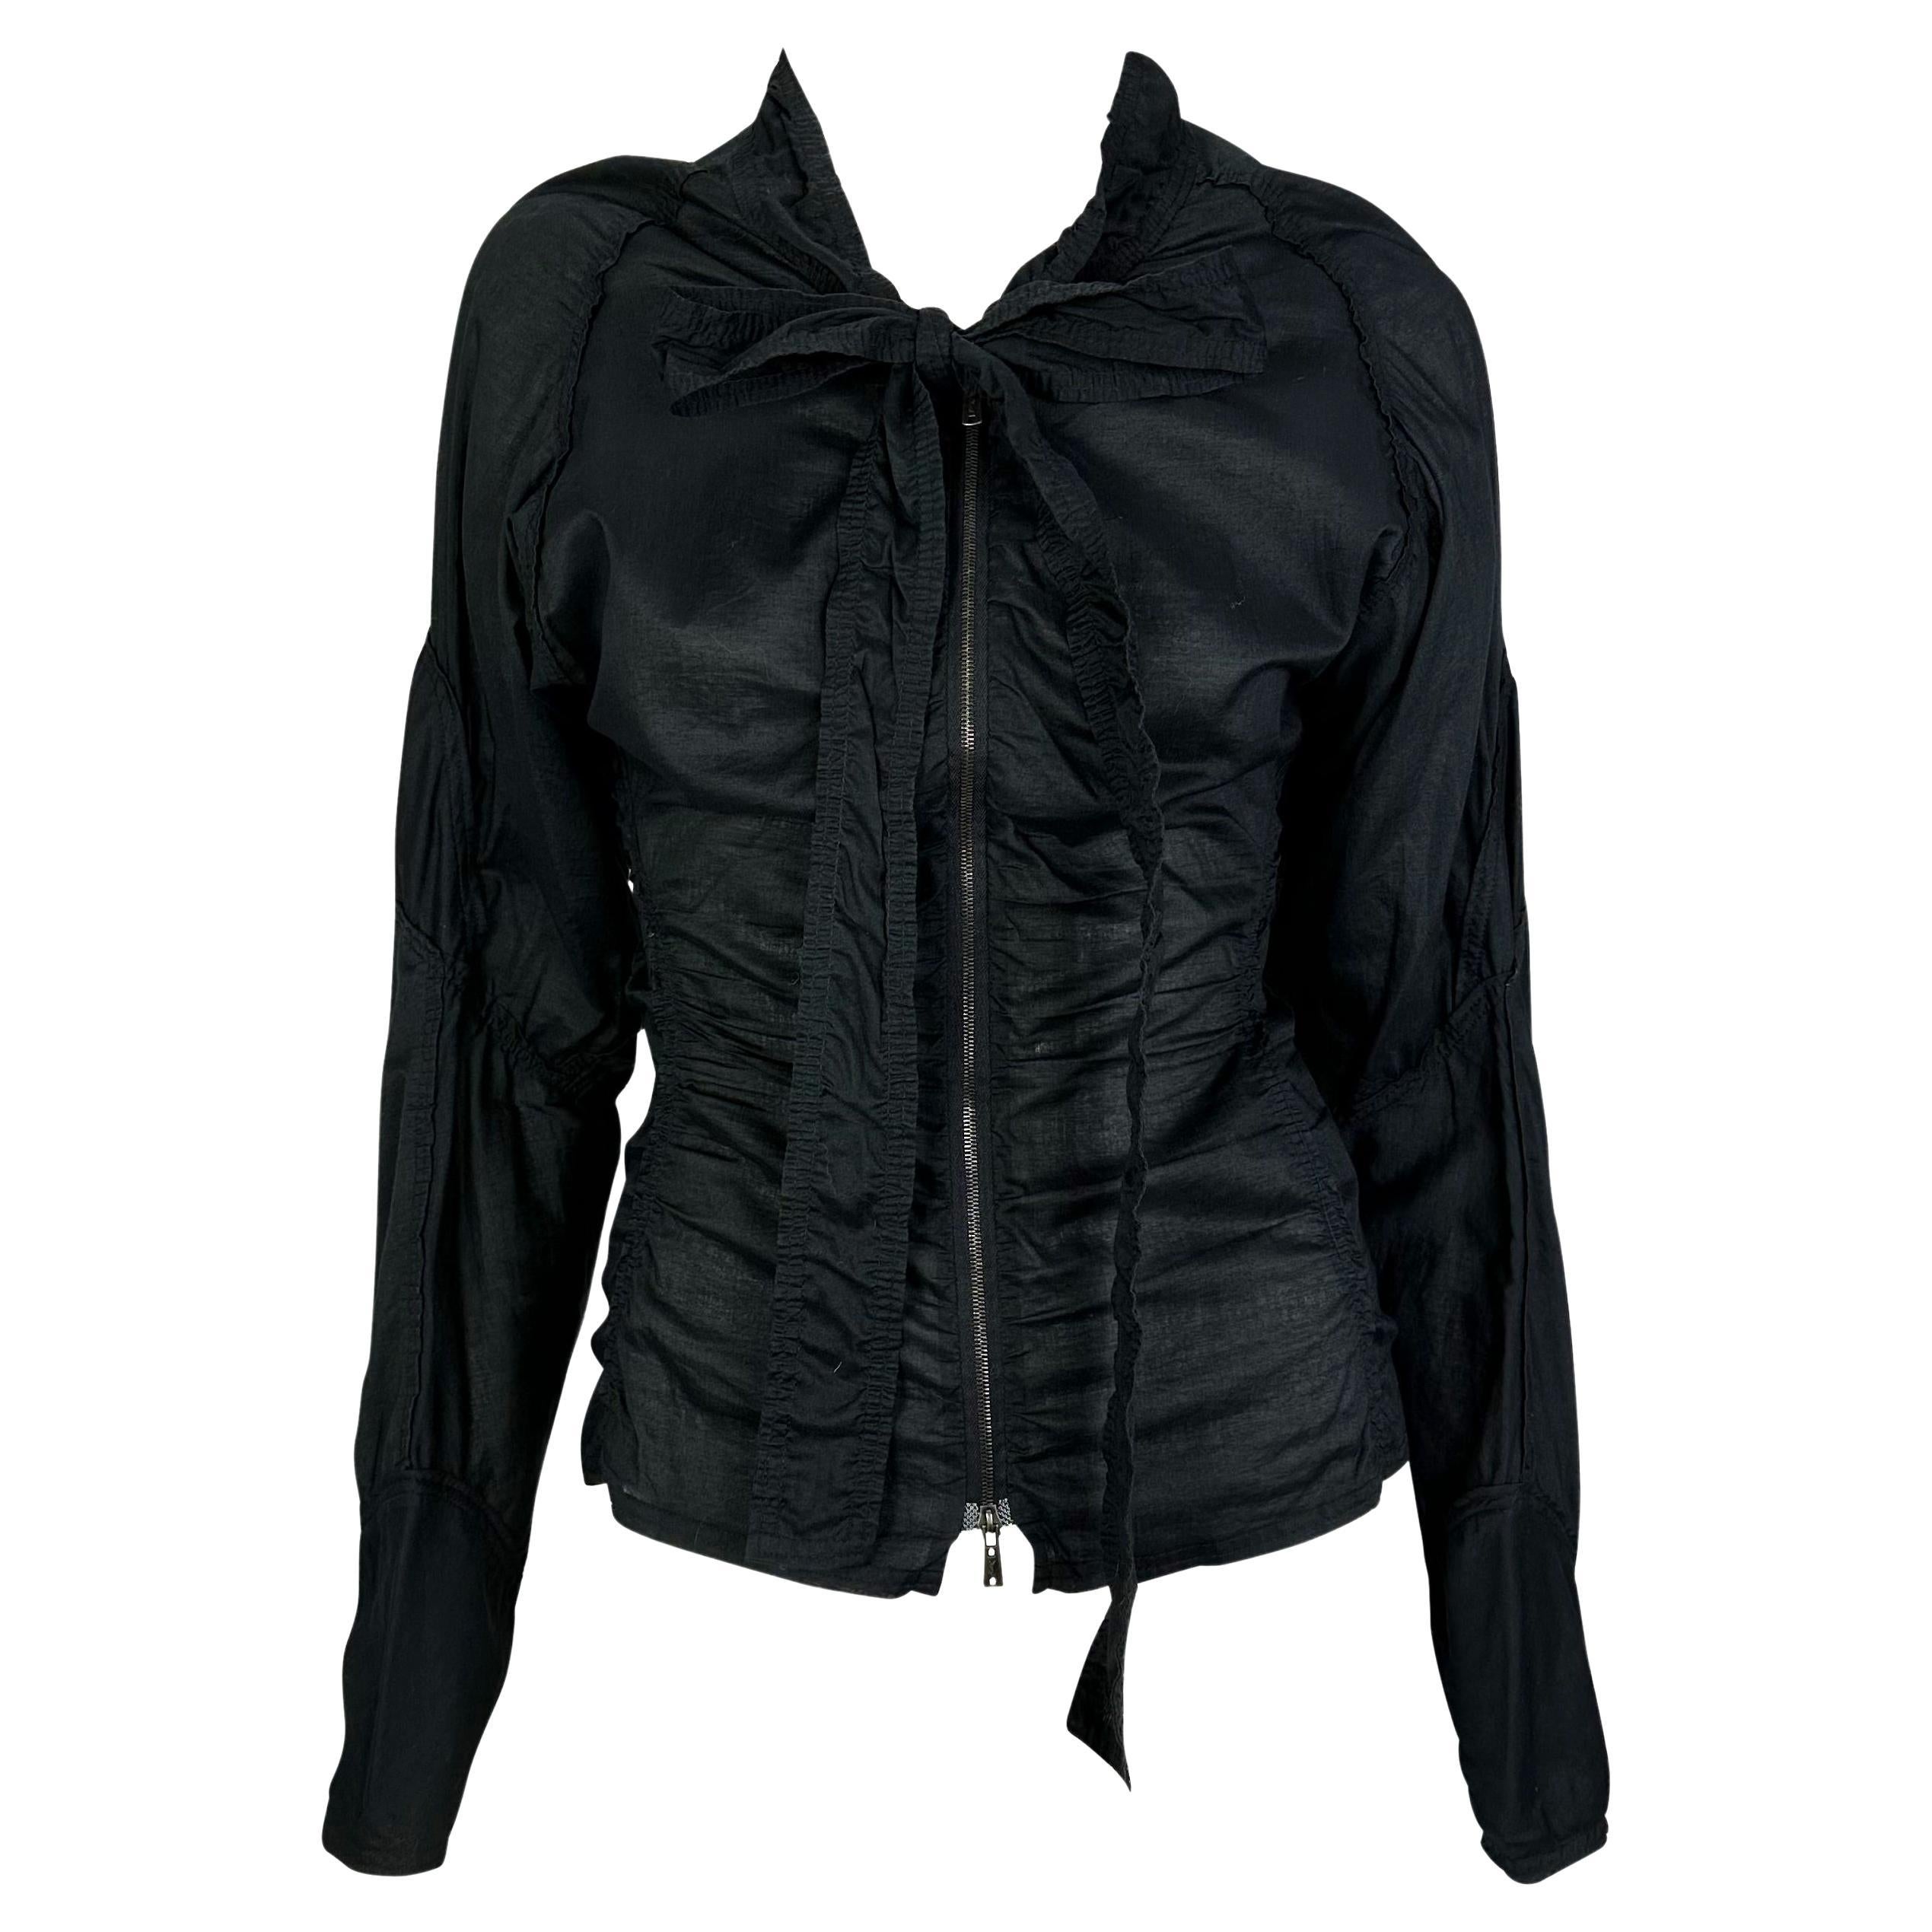 S/S 2002 Yves Saint Laurent by Tom Ford Safari Black Ruched Pussy Bow Zip Top For Sale